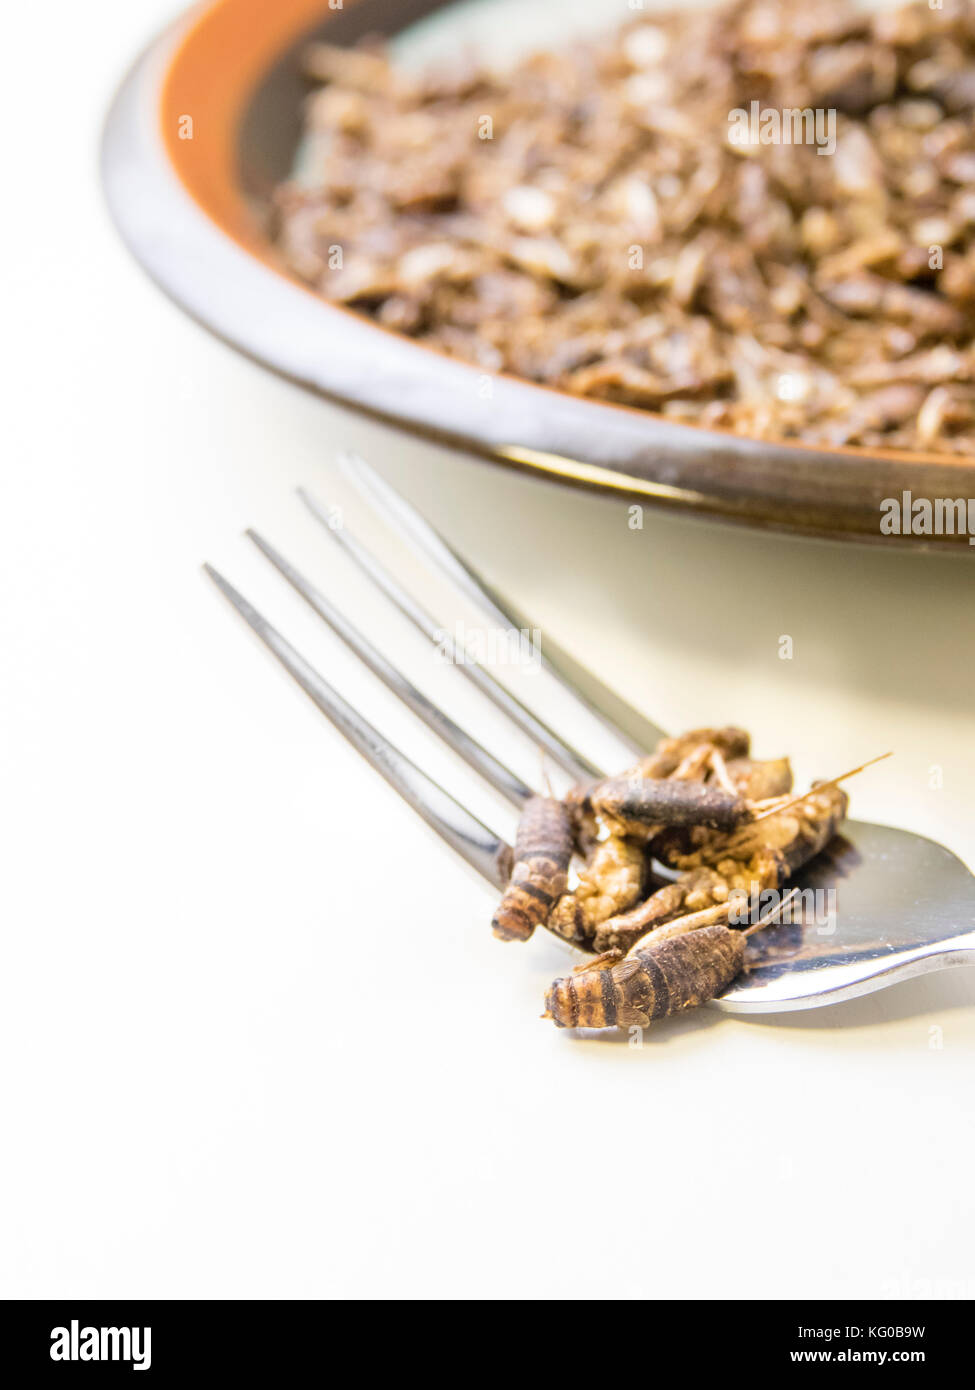 Crickets on plate in kitchen. Edible insects as food product filled with protein and nutrition. Stock Photo